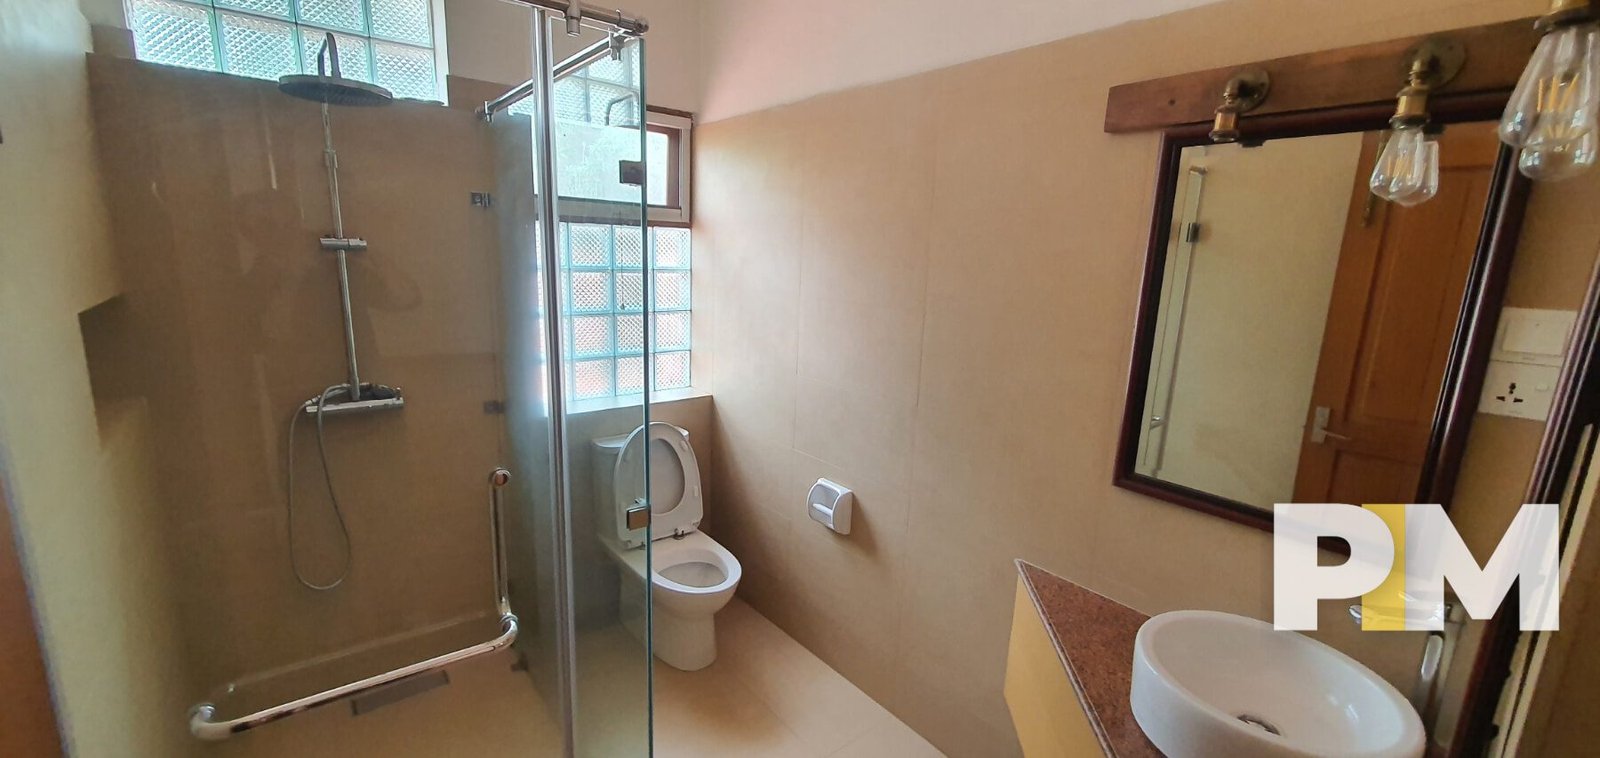 Tiolet room with sink - Yangon Real Estate (2)